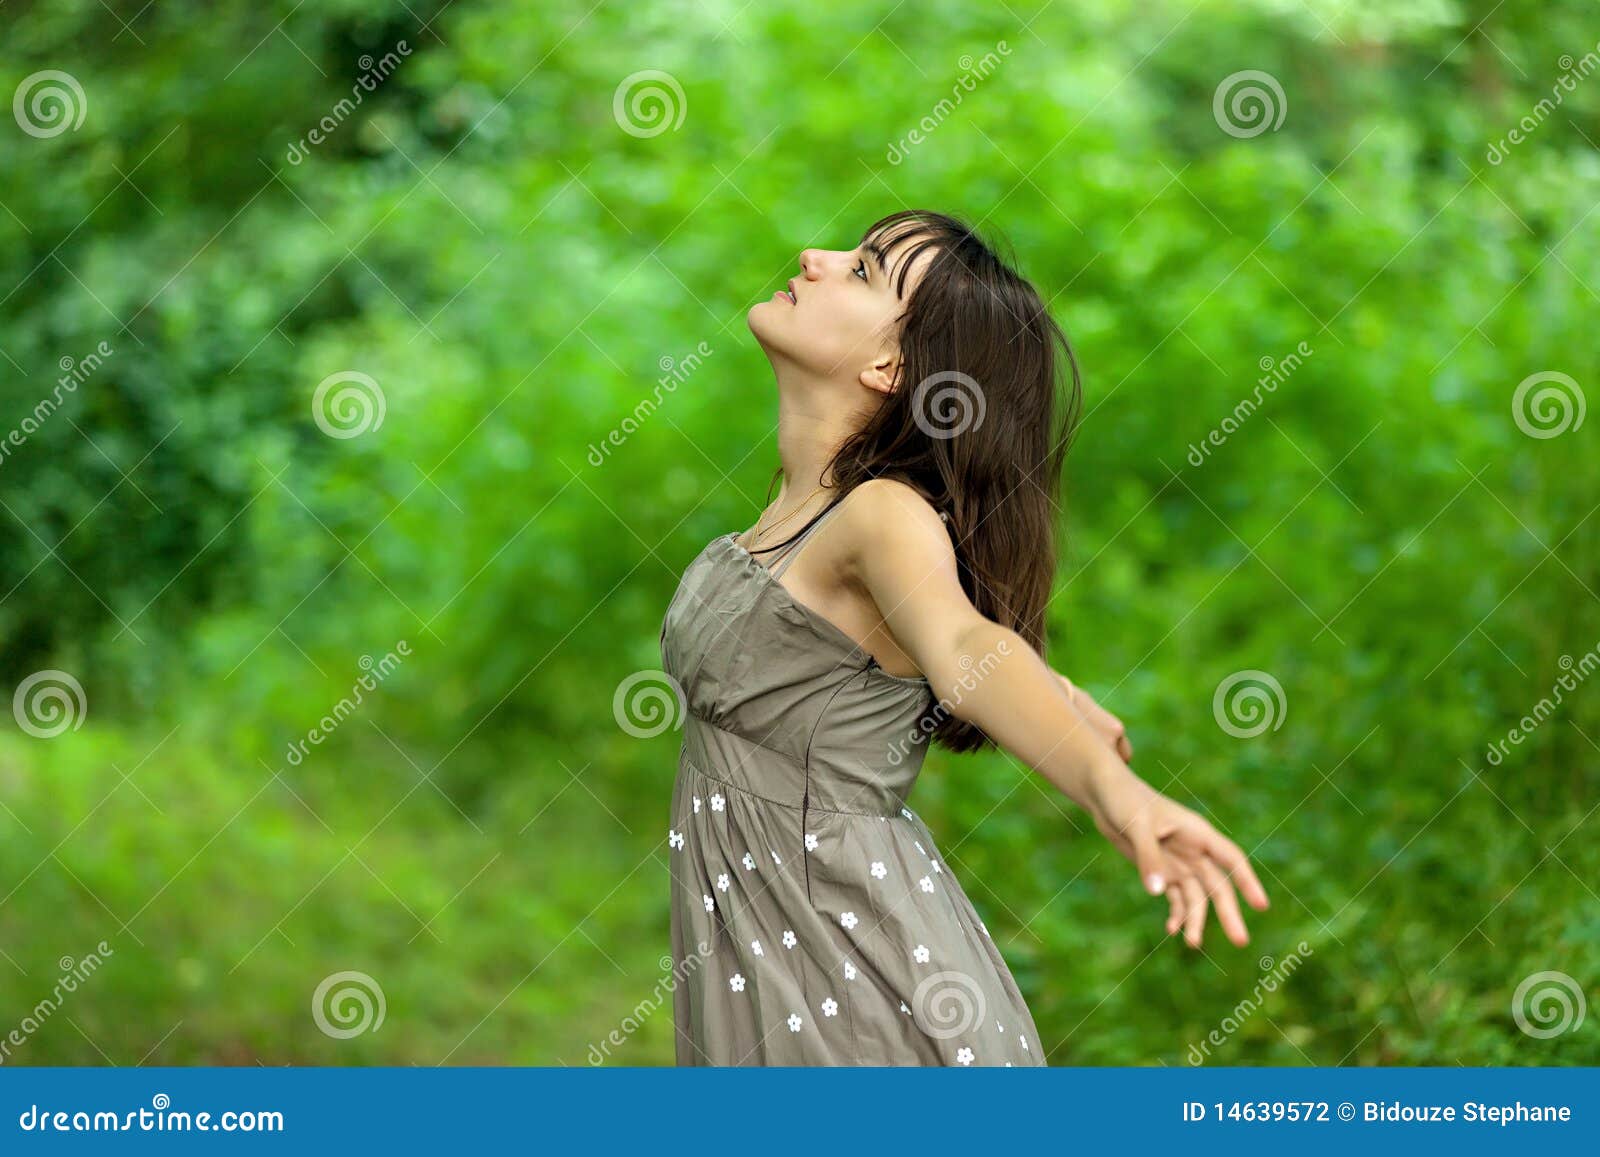 Teen girl nature portrait stock photo. Image of natural 